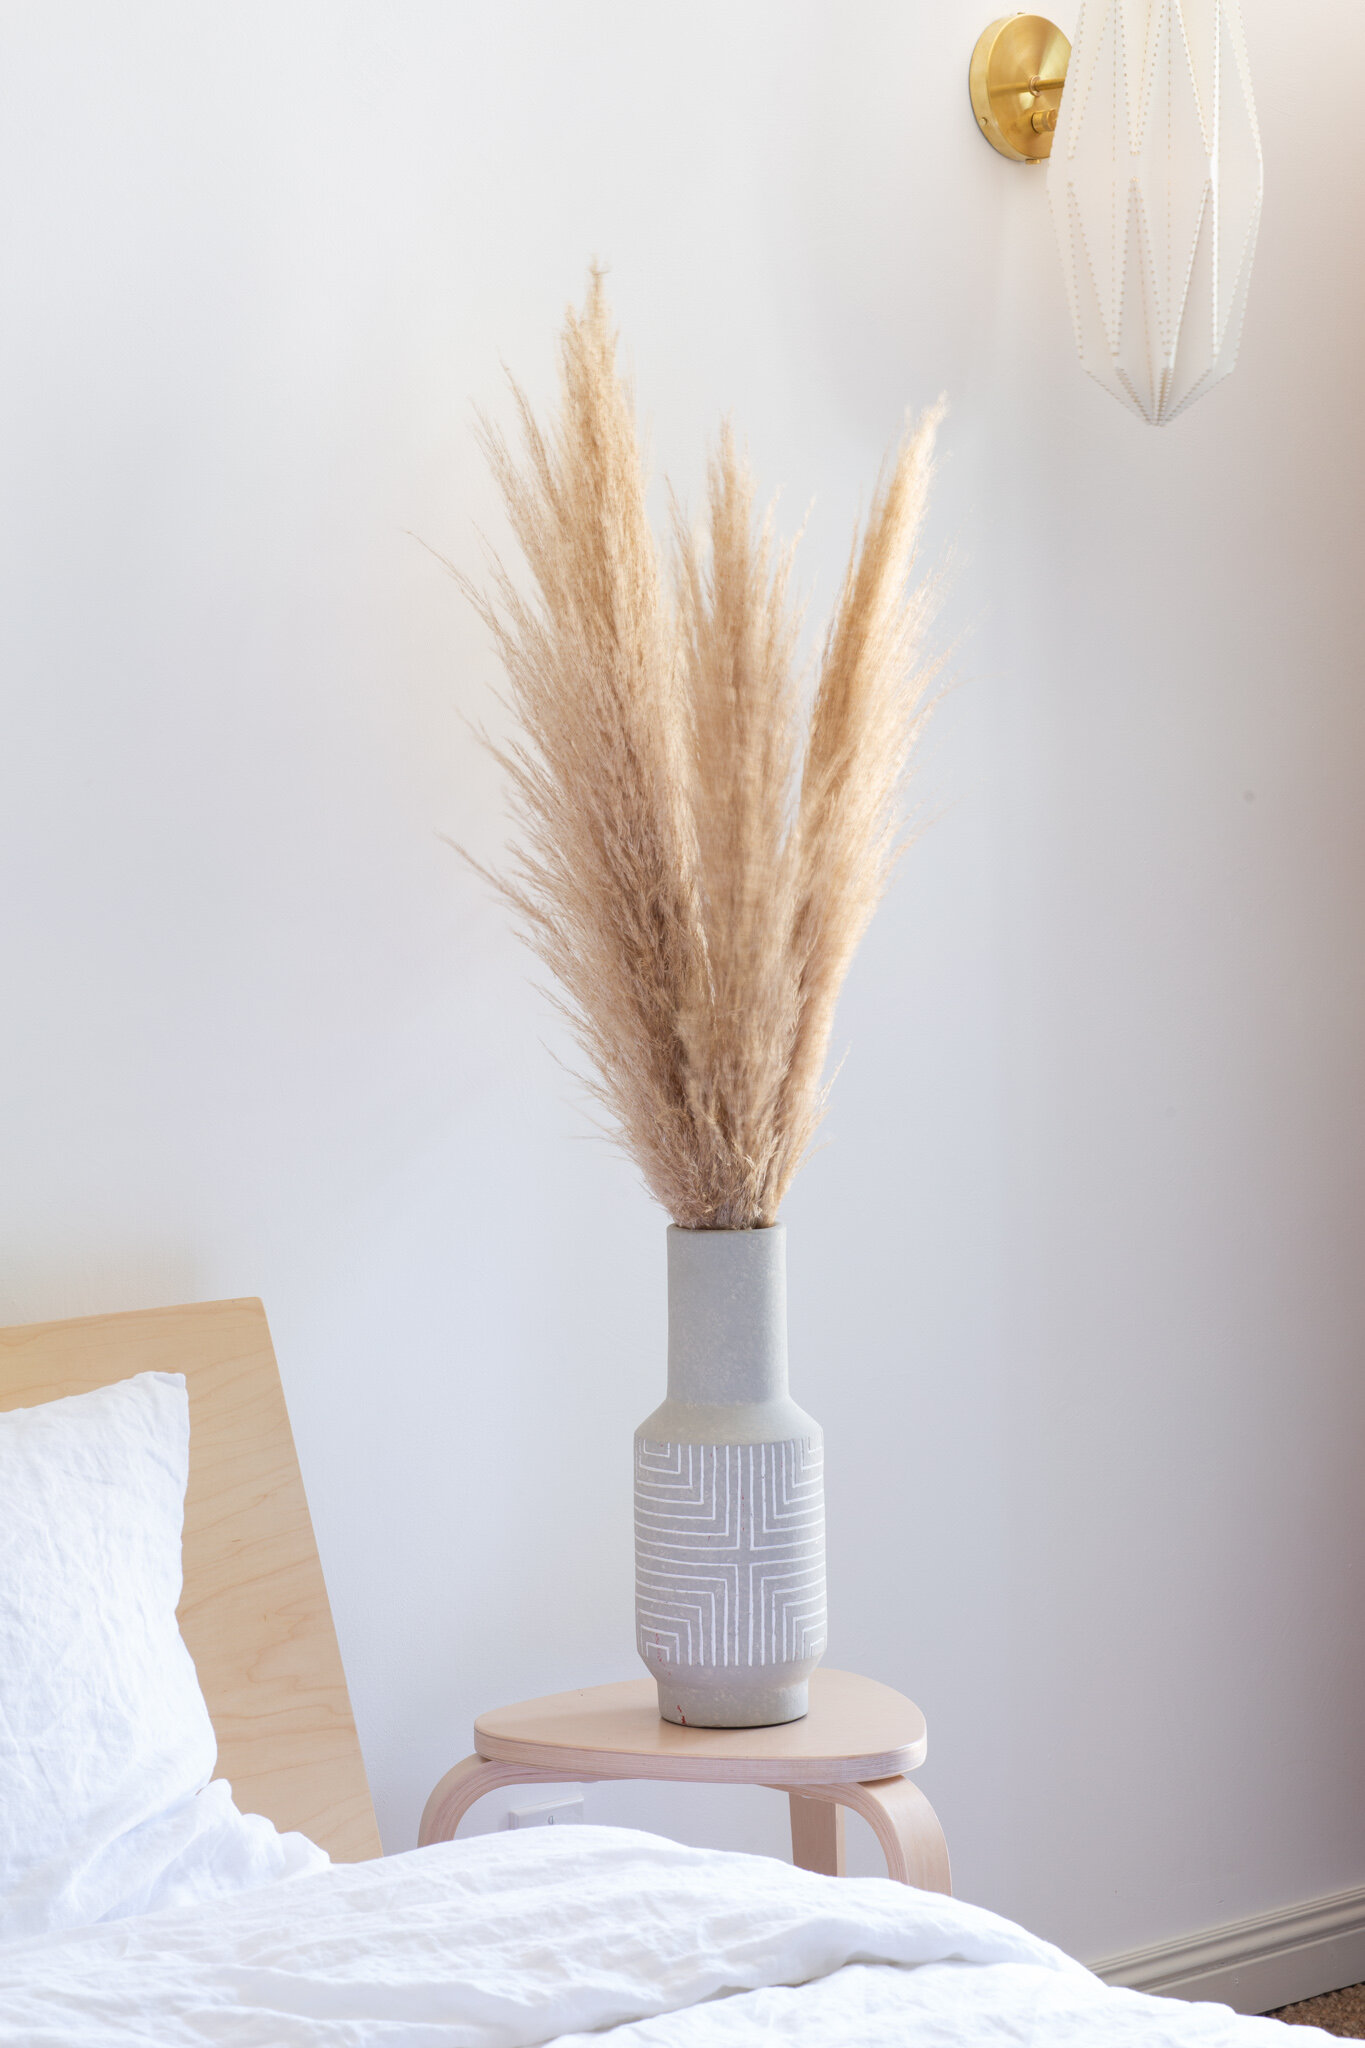  Tall Pampas Grass adds height and drama while keeping things airy and neutral. 